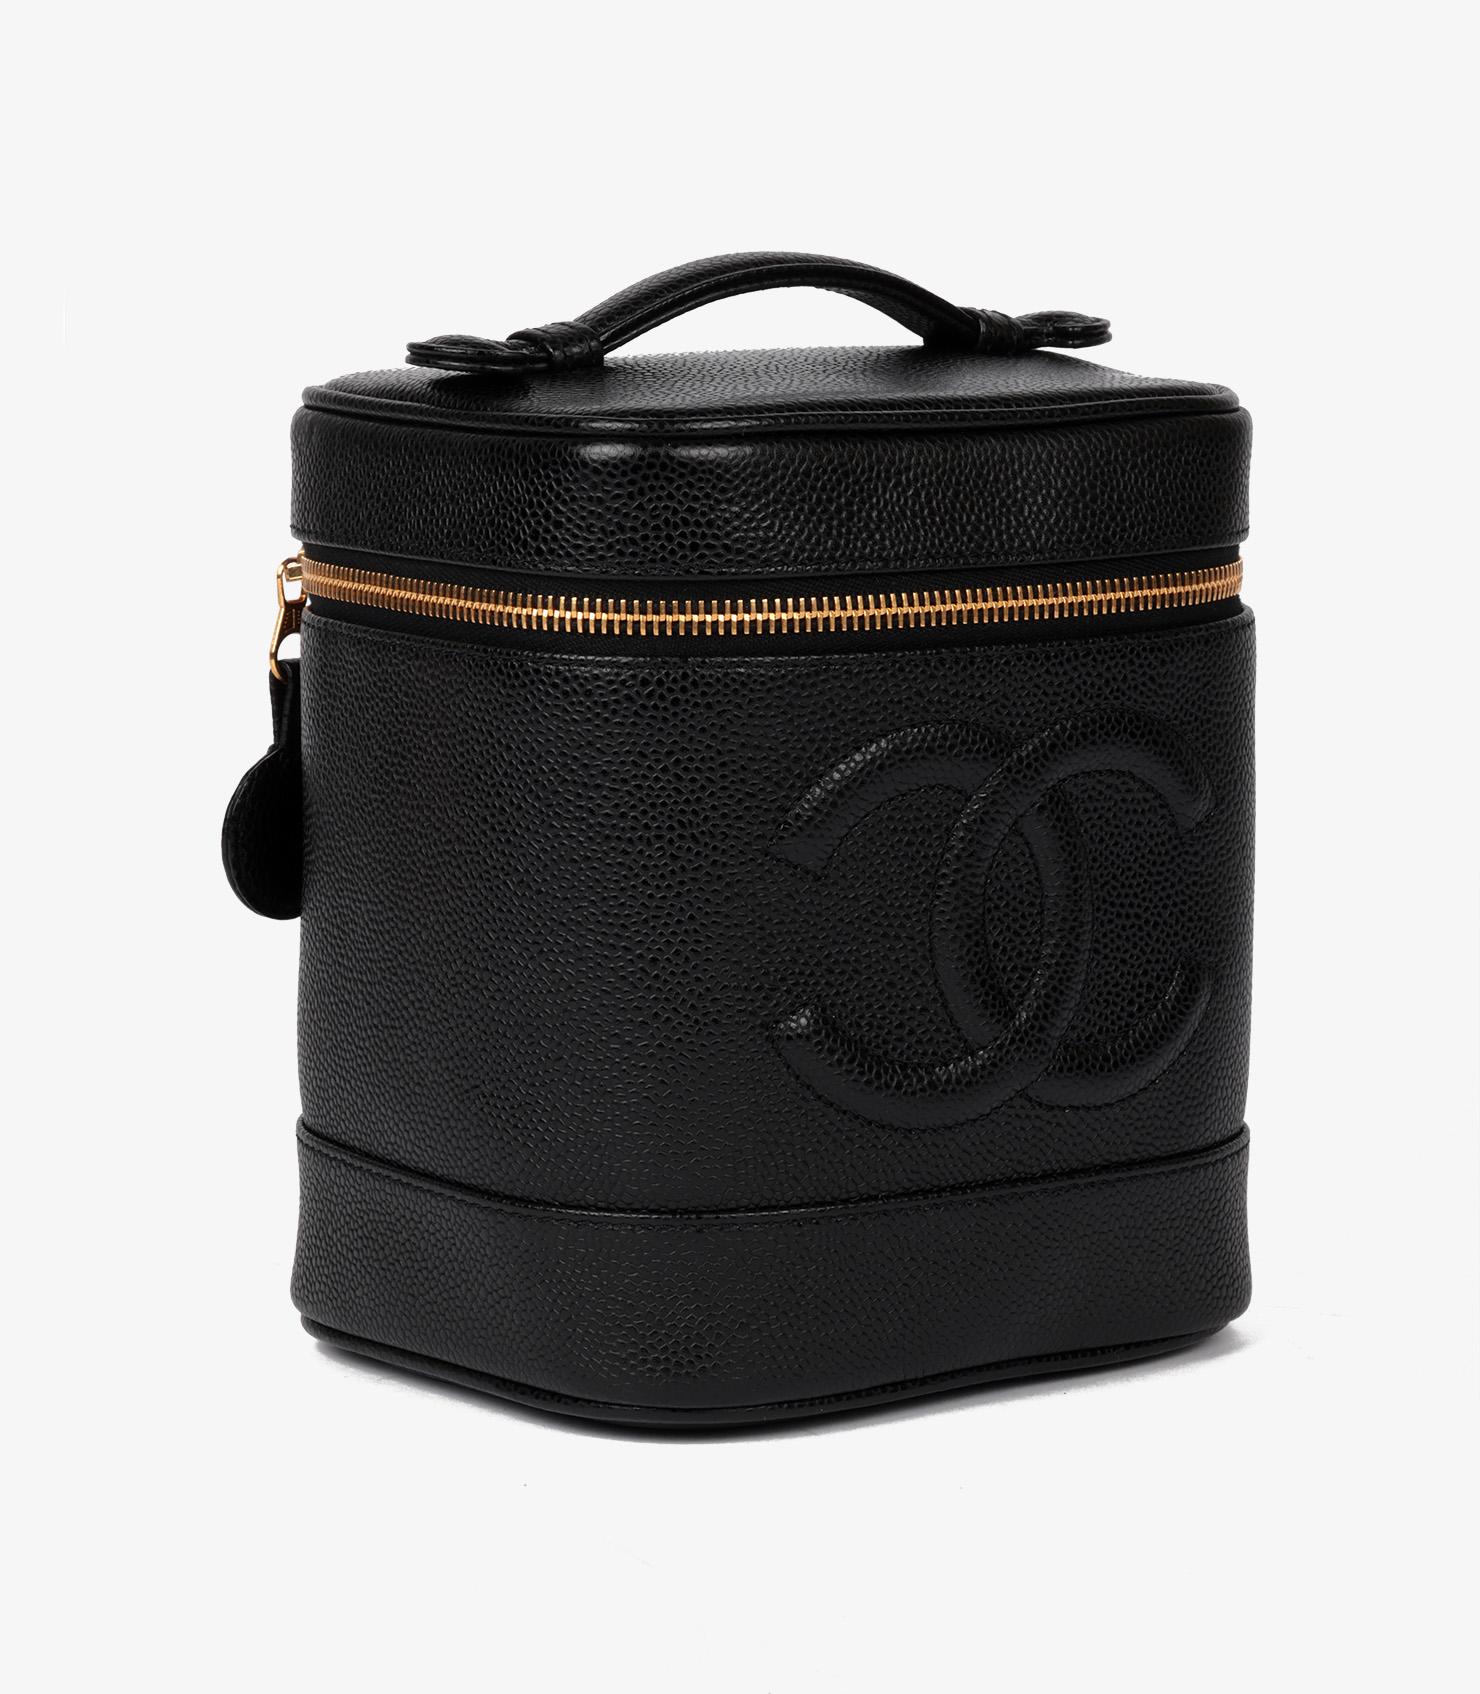 Chanel Black Caviar Leather Vintage Timeless Vanity Case

Brand- Chanel
Model- Timeless Vanity Case
Product Type- Case
Serial Number- 59*****
Accompanied By- Chanel Dust Bag, Authenticity Card
Colour- Black
Hardware- Gold
Material(s)- Caviar